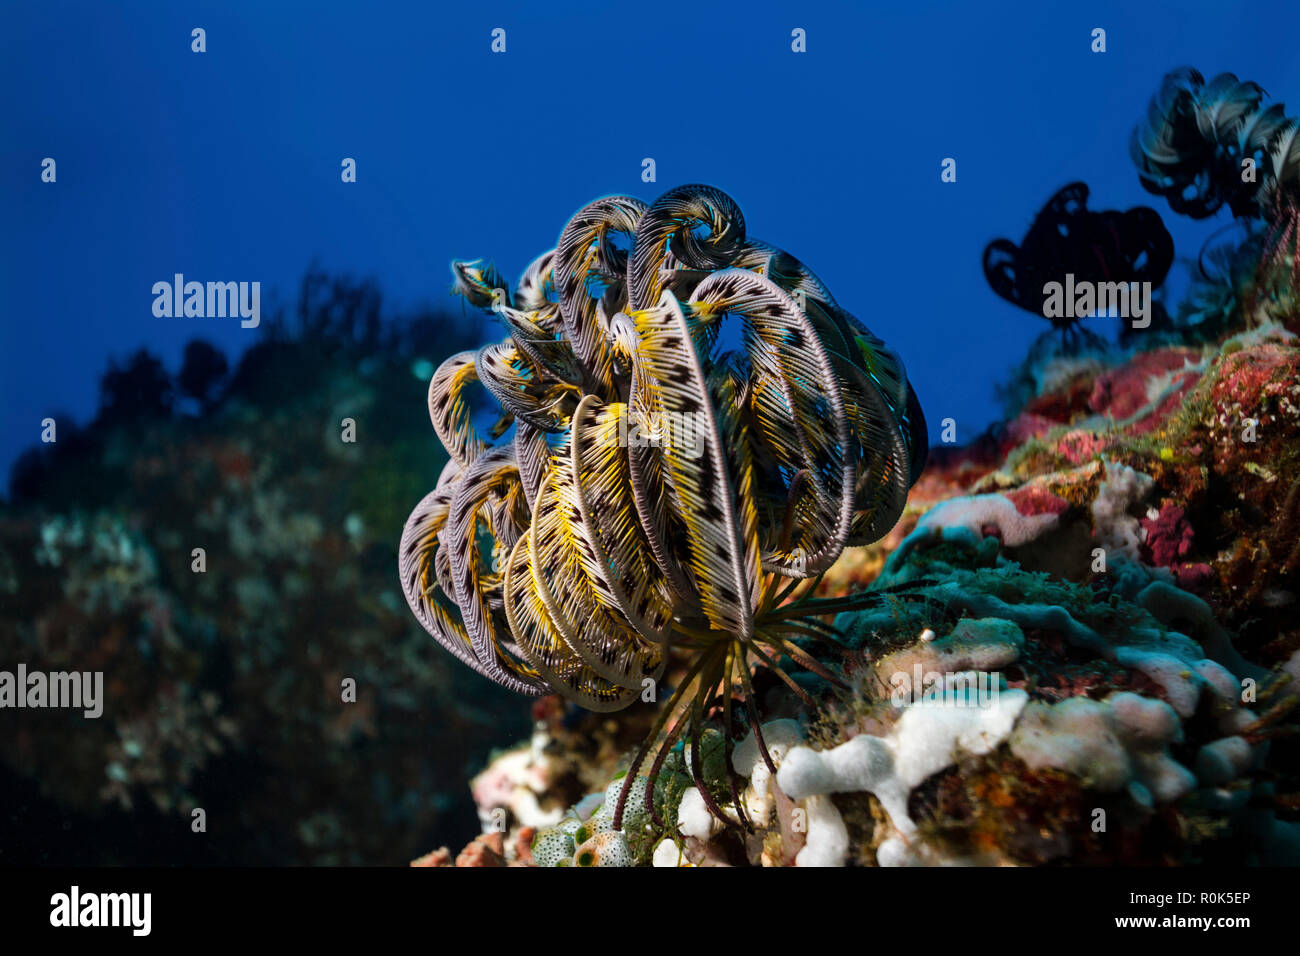 A feather star is ready to feed on the particles that the current brings to it. Stock Photo